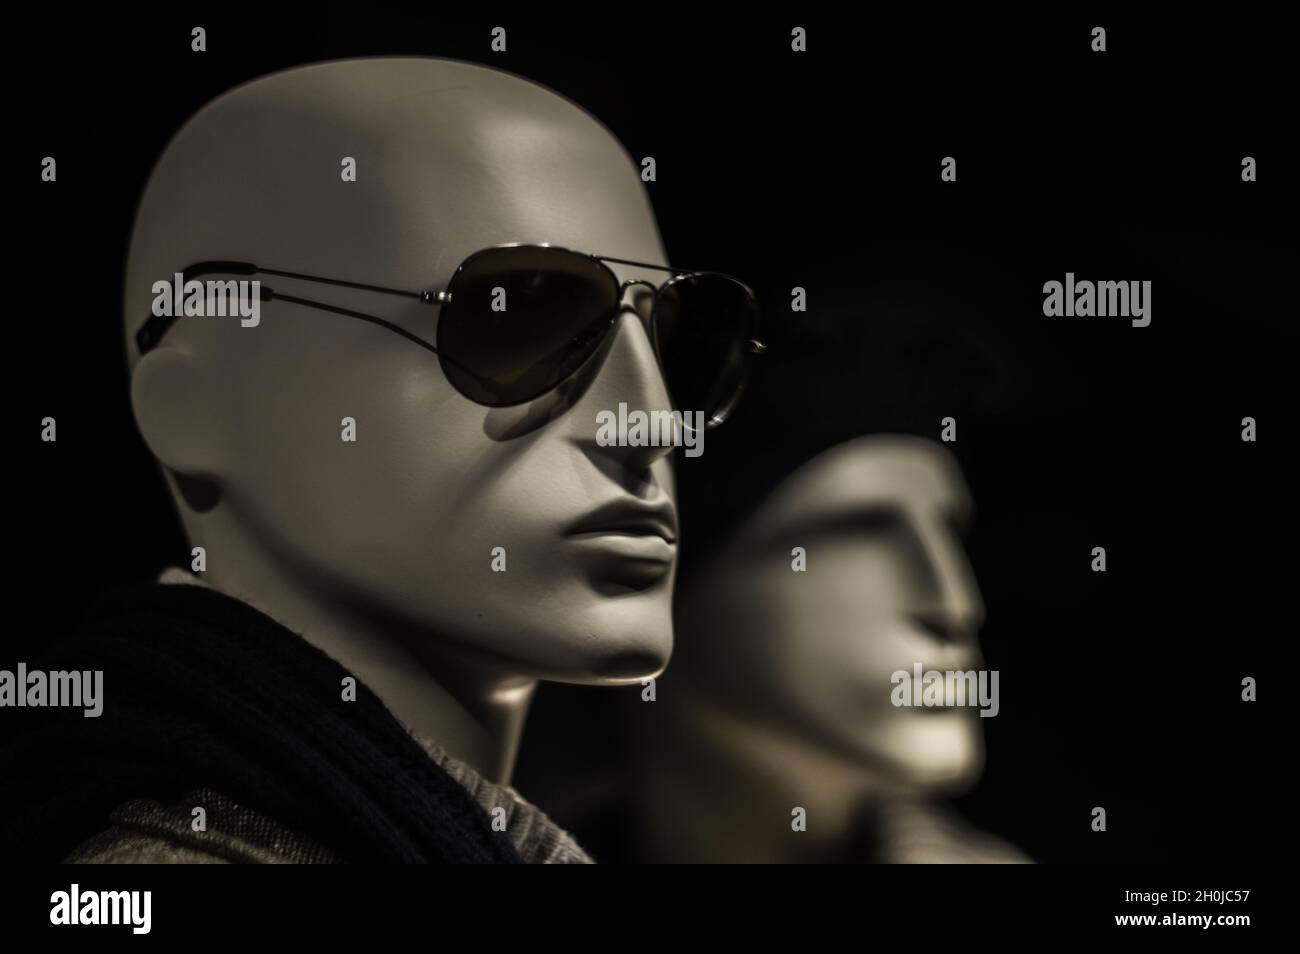 Plastic mannequin head with black sunglasses in a store Stock Photo